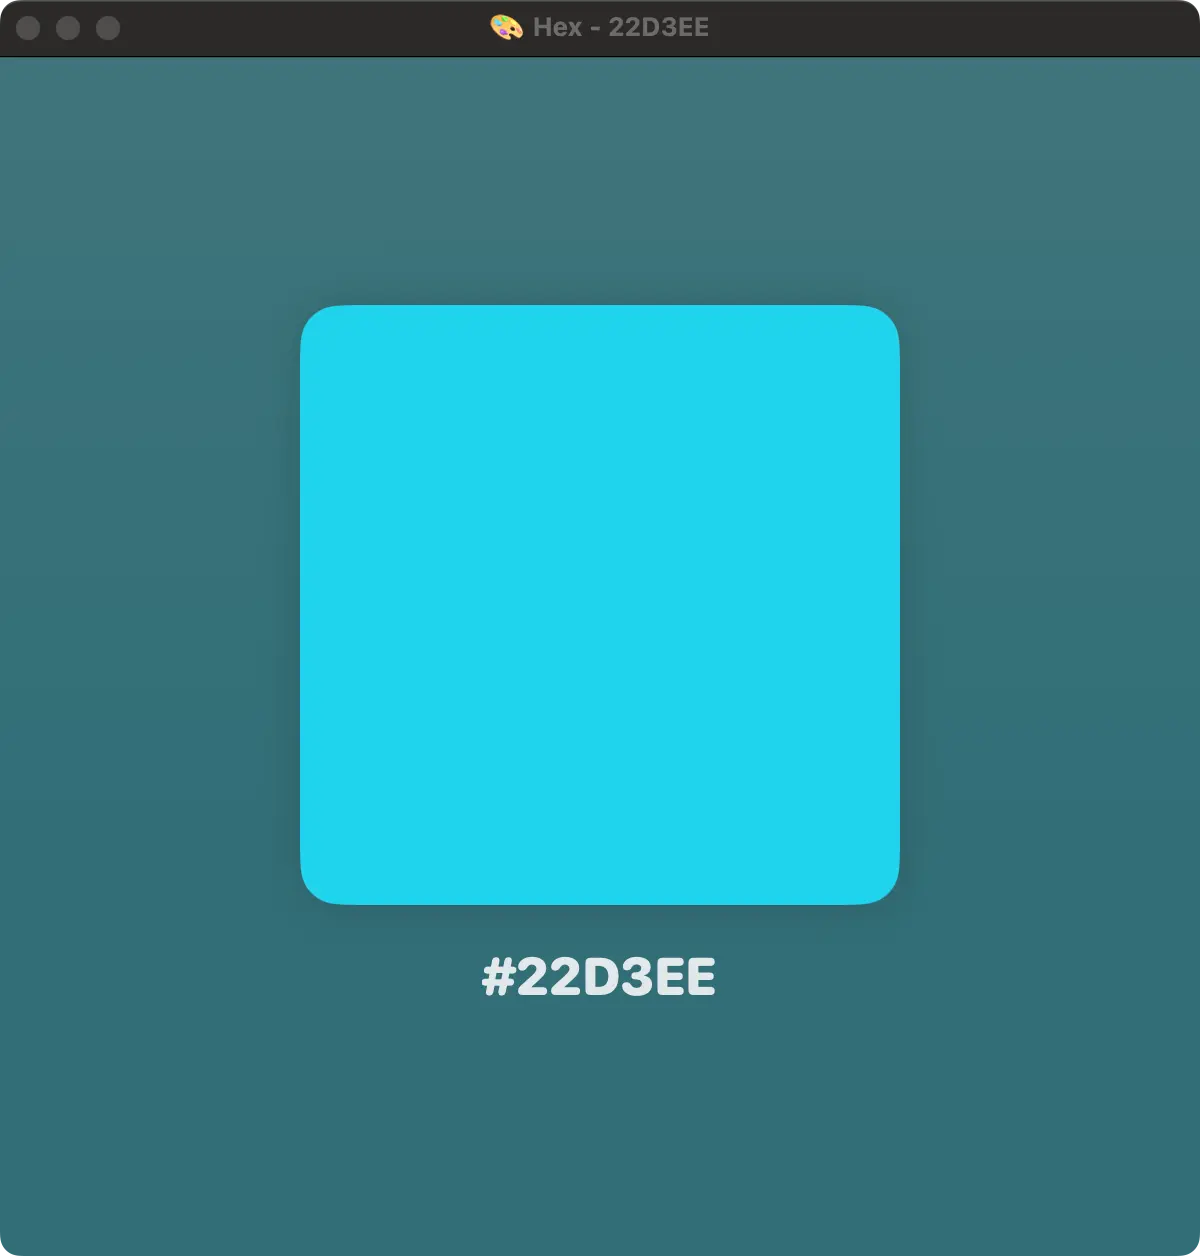 A window showing the colour entered by the user